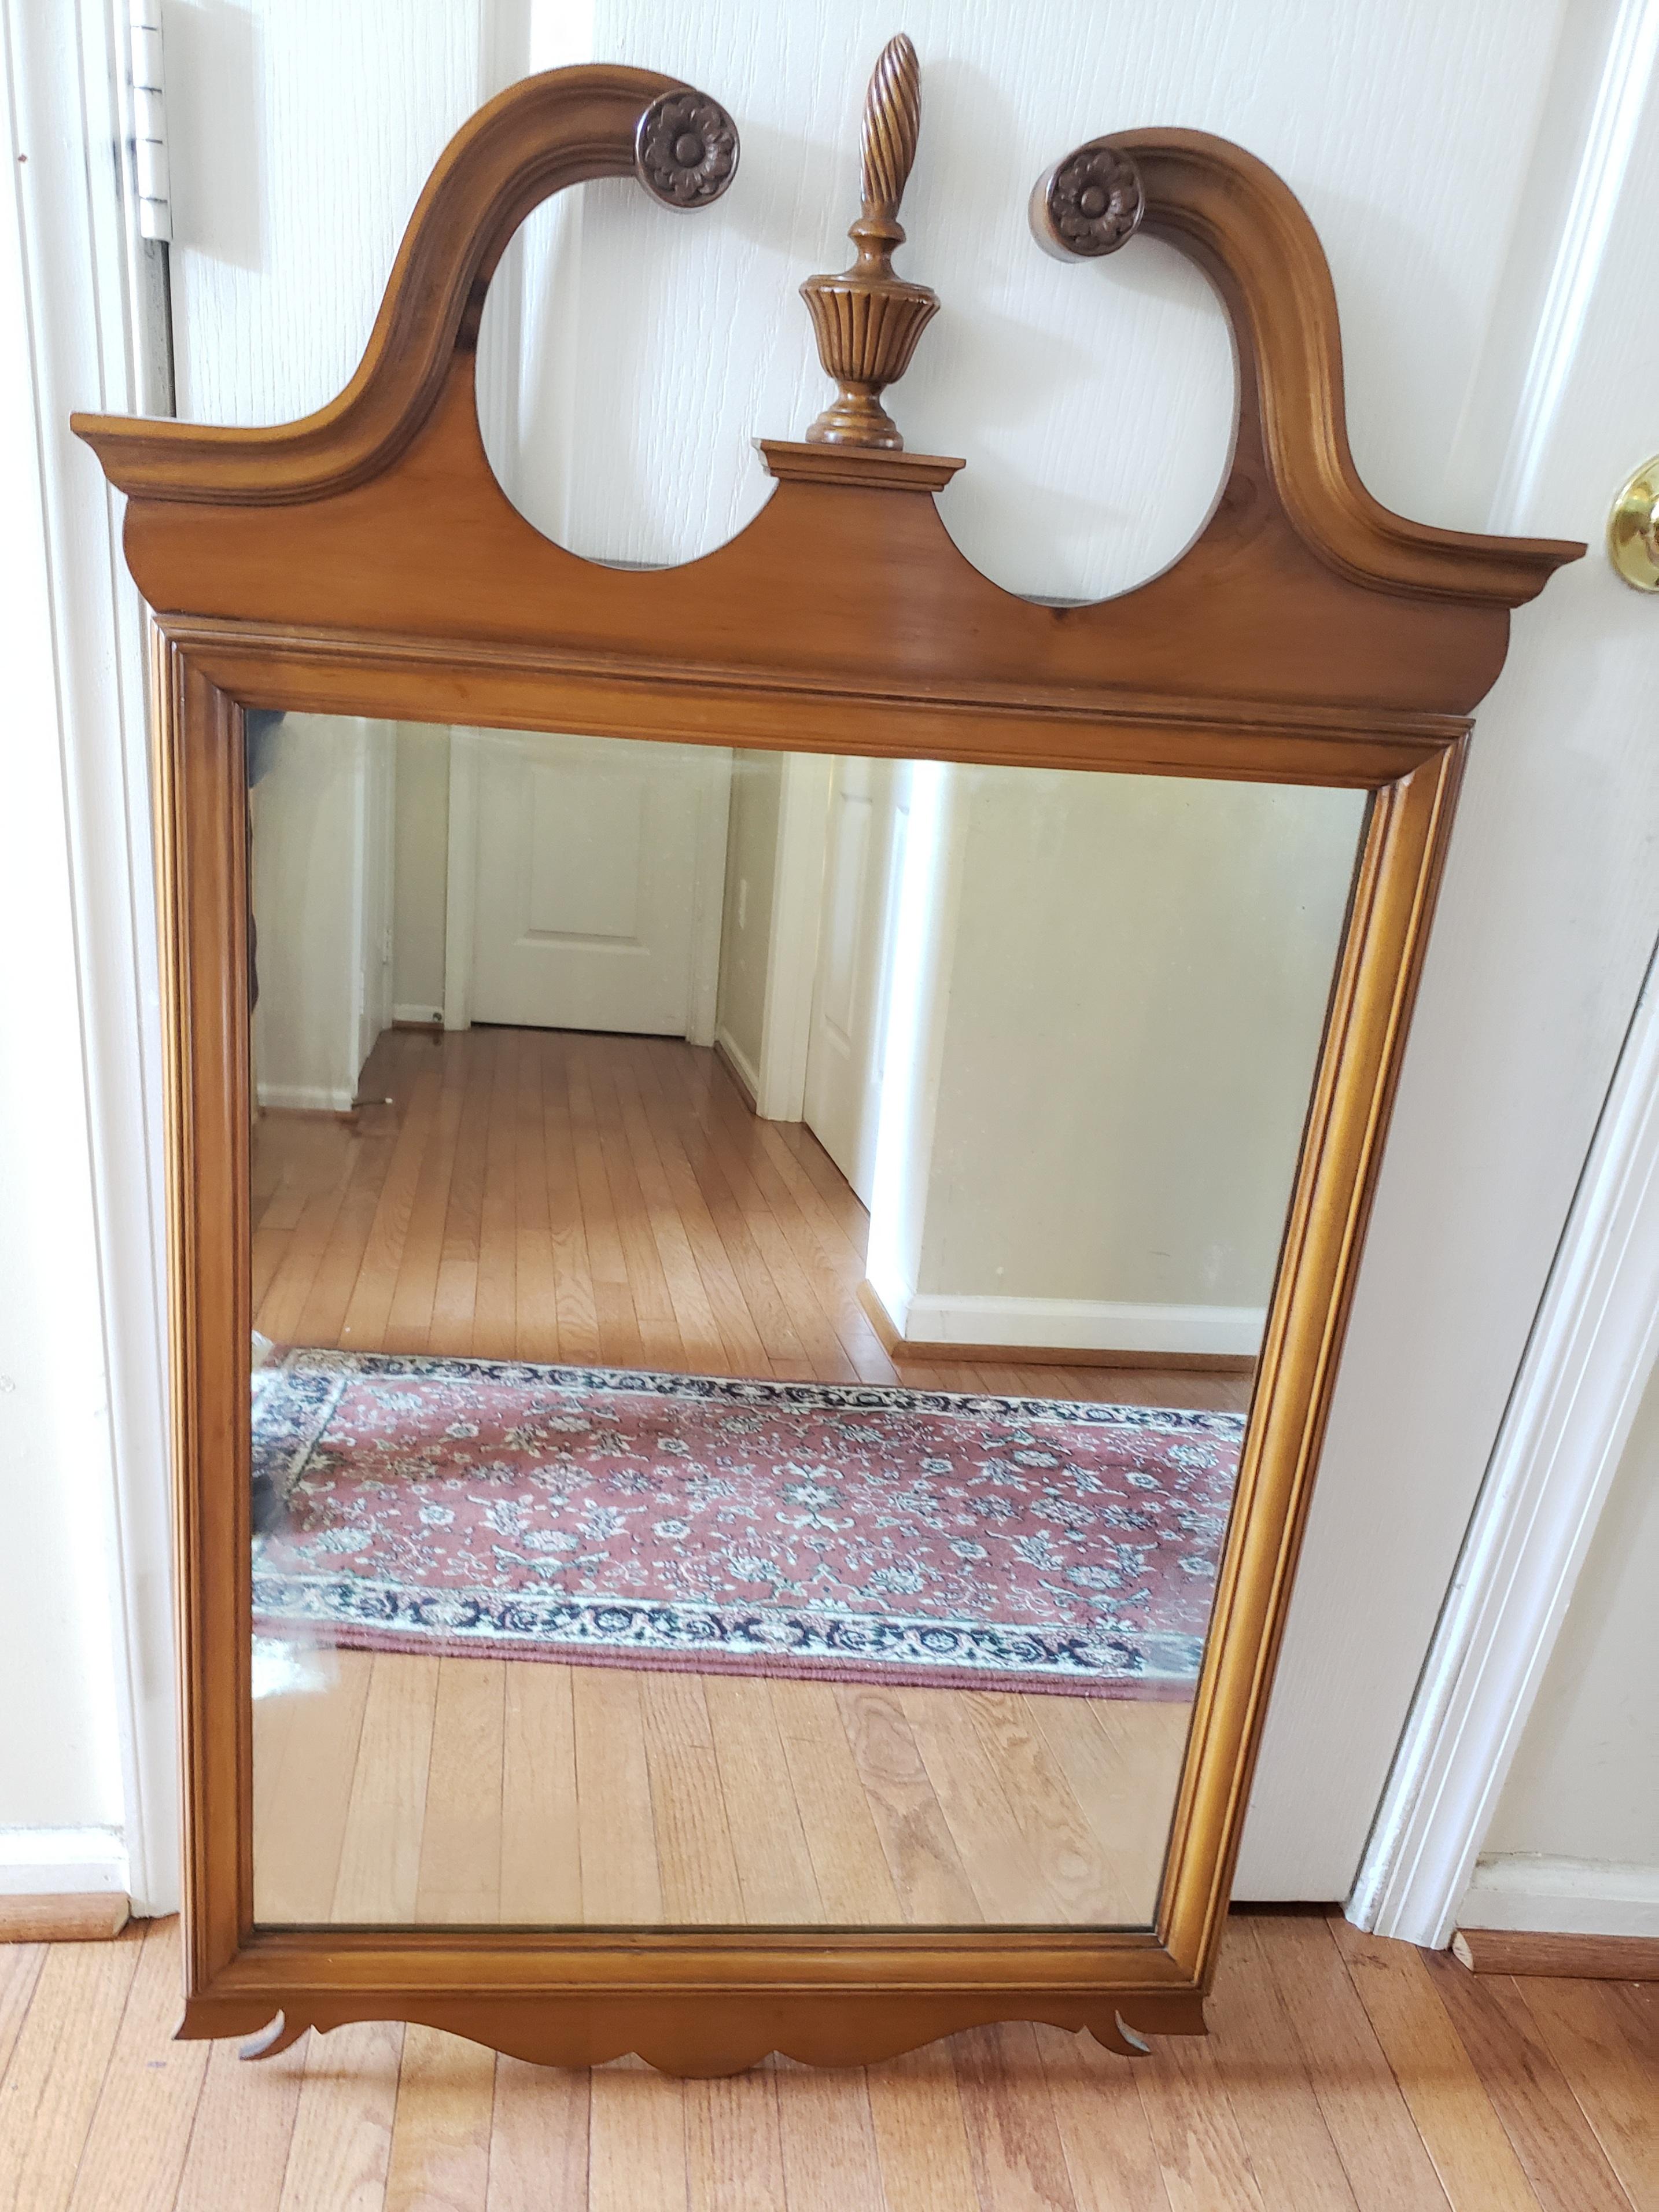 Huntley Thomasville Maple Chippendale Carved Urn Mirror, Circa 1940s For Sale 1